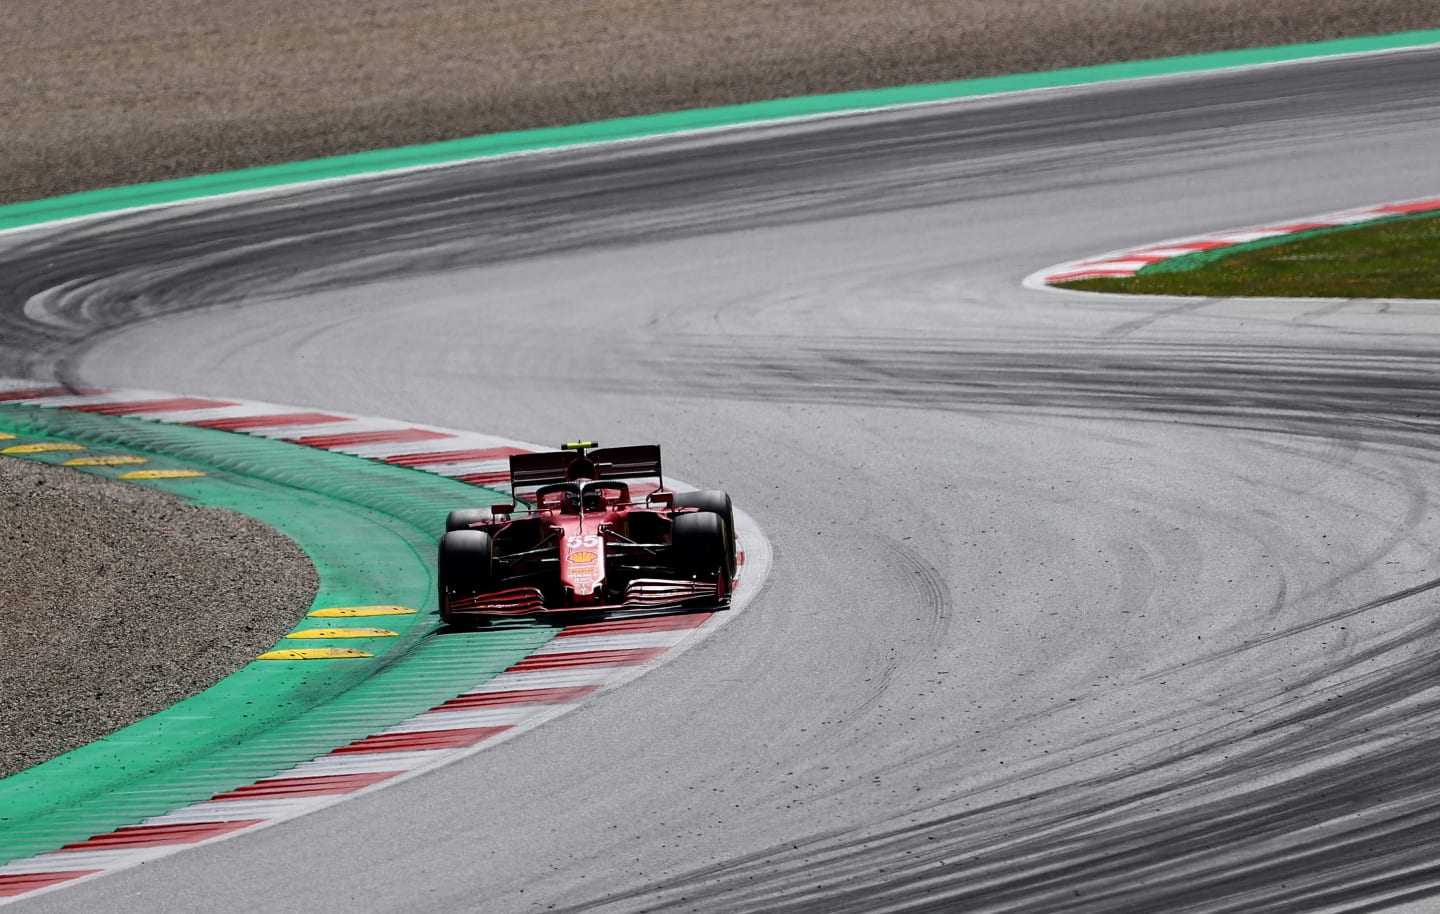 SPIELBERG, AUSTRIA - JUNE 27: Carlos Sainz of Spain driving the (55) Scuderia Ferrari SF21 during the F1 Grand Prix of Styria at Red Bull Ring on June 27, 2021 in Spielberg, Austria. (Photo by Clive Rose/Getty Images)